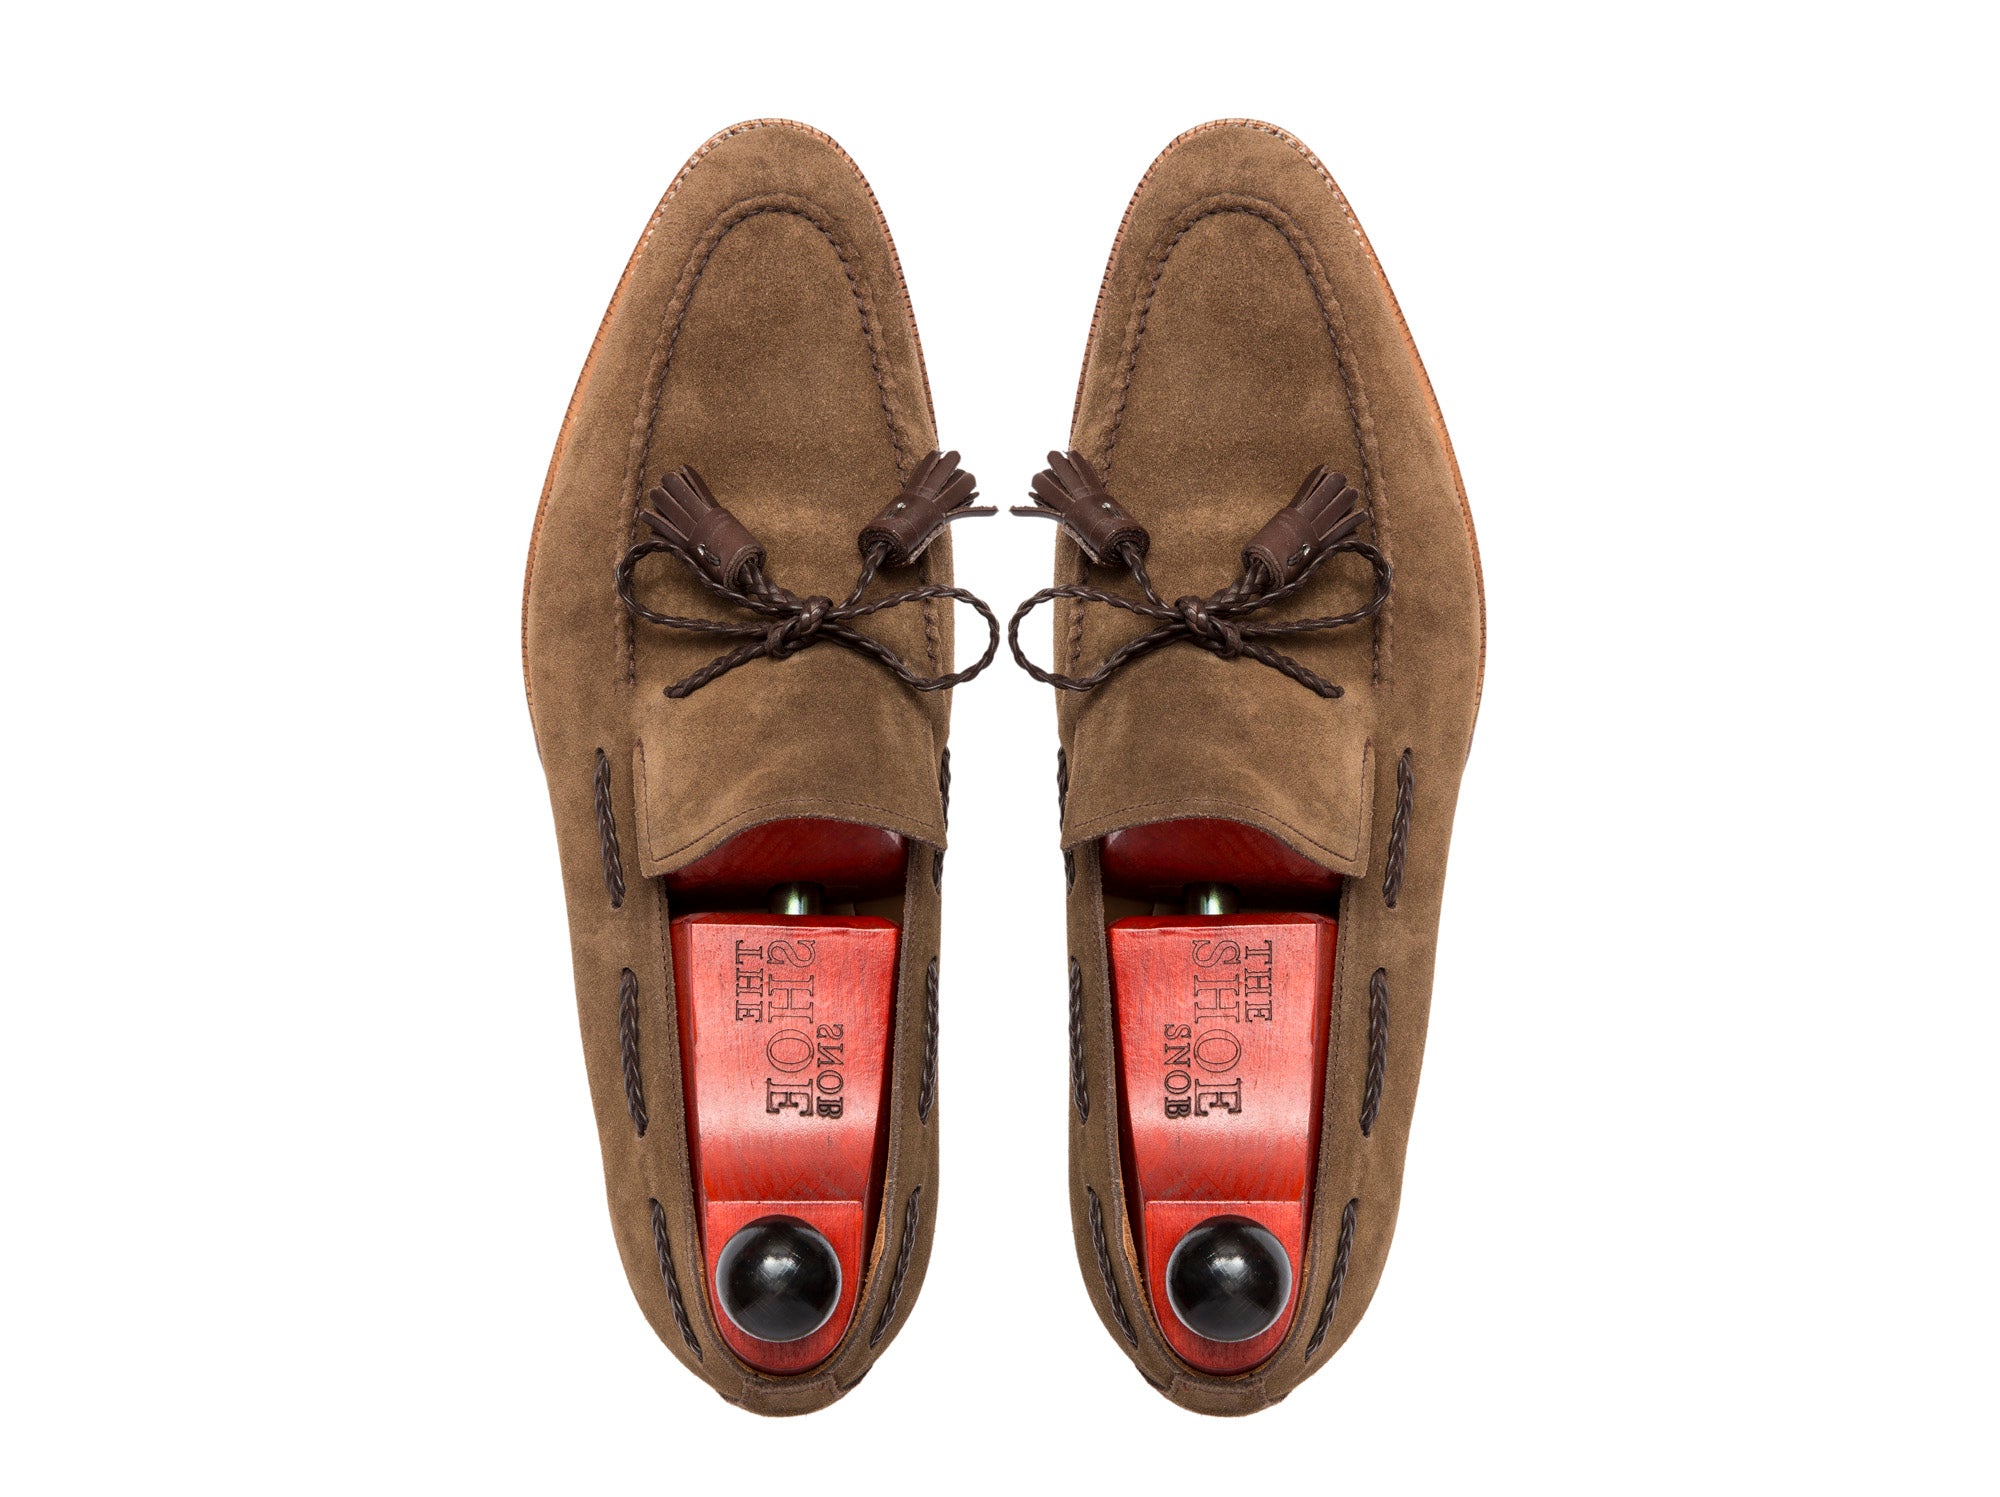 Issaquah - MTO - Taupe Suede - TMG Last - Natural Single Leather Sole